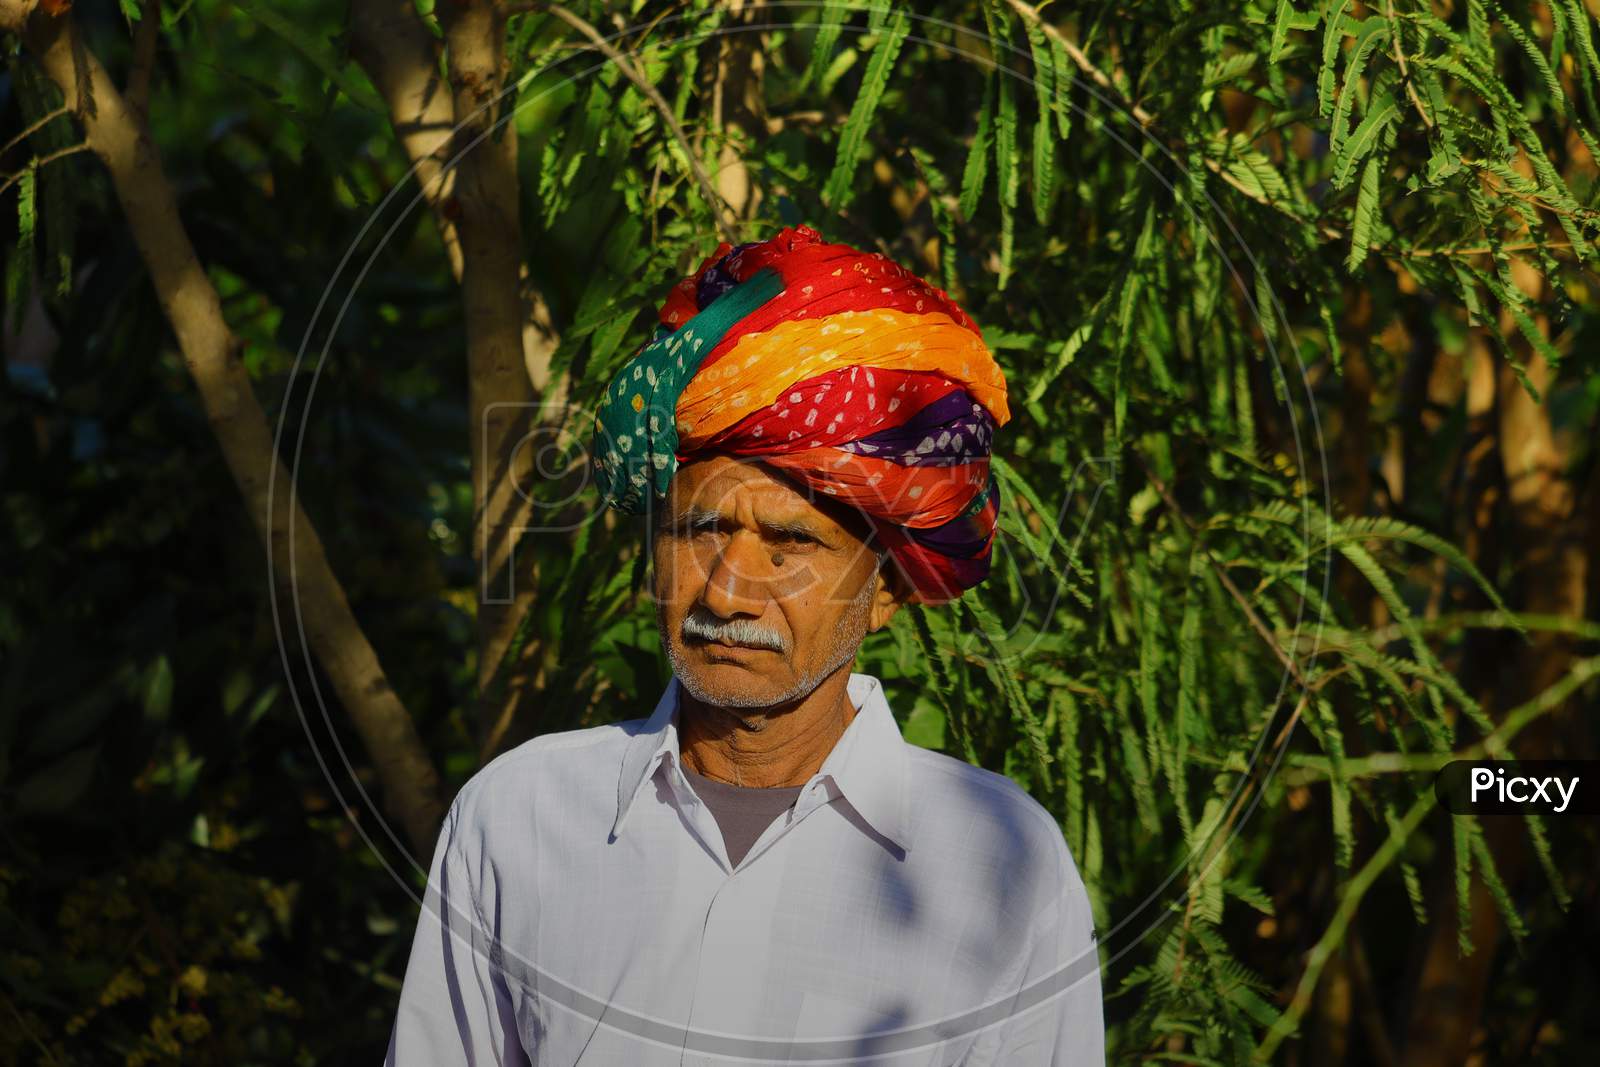 Image of According To Rajasthani Culture, An Indian Farmer Wearing A ...